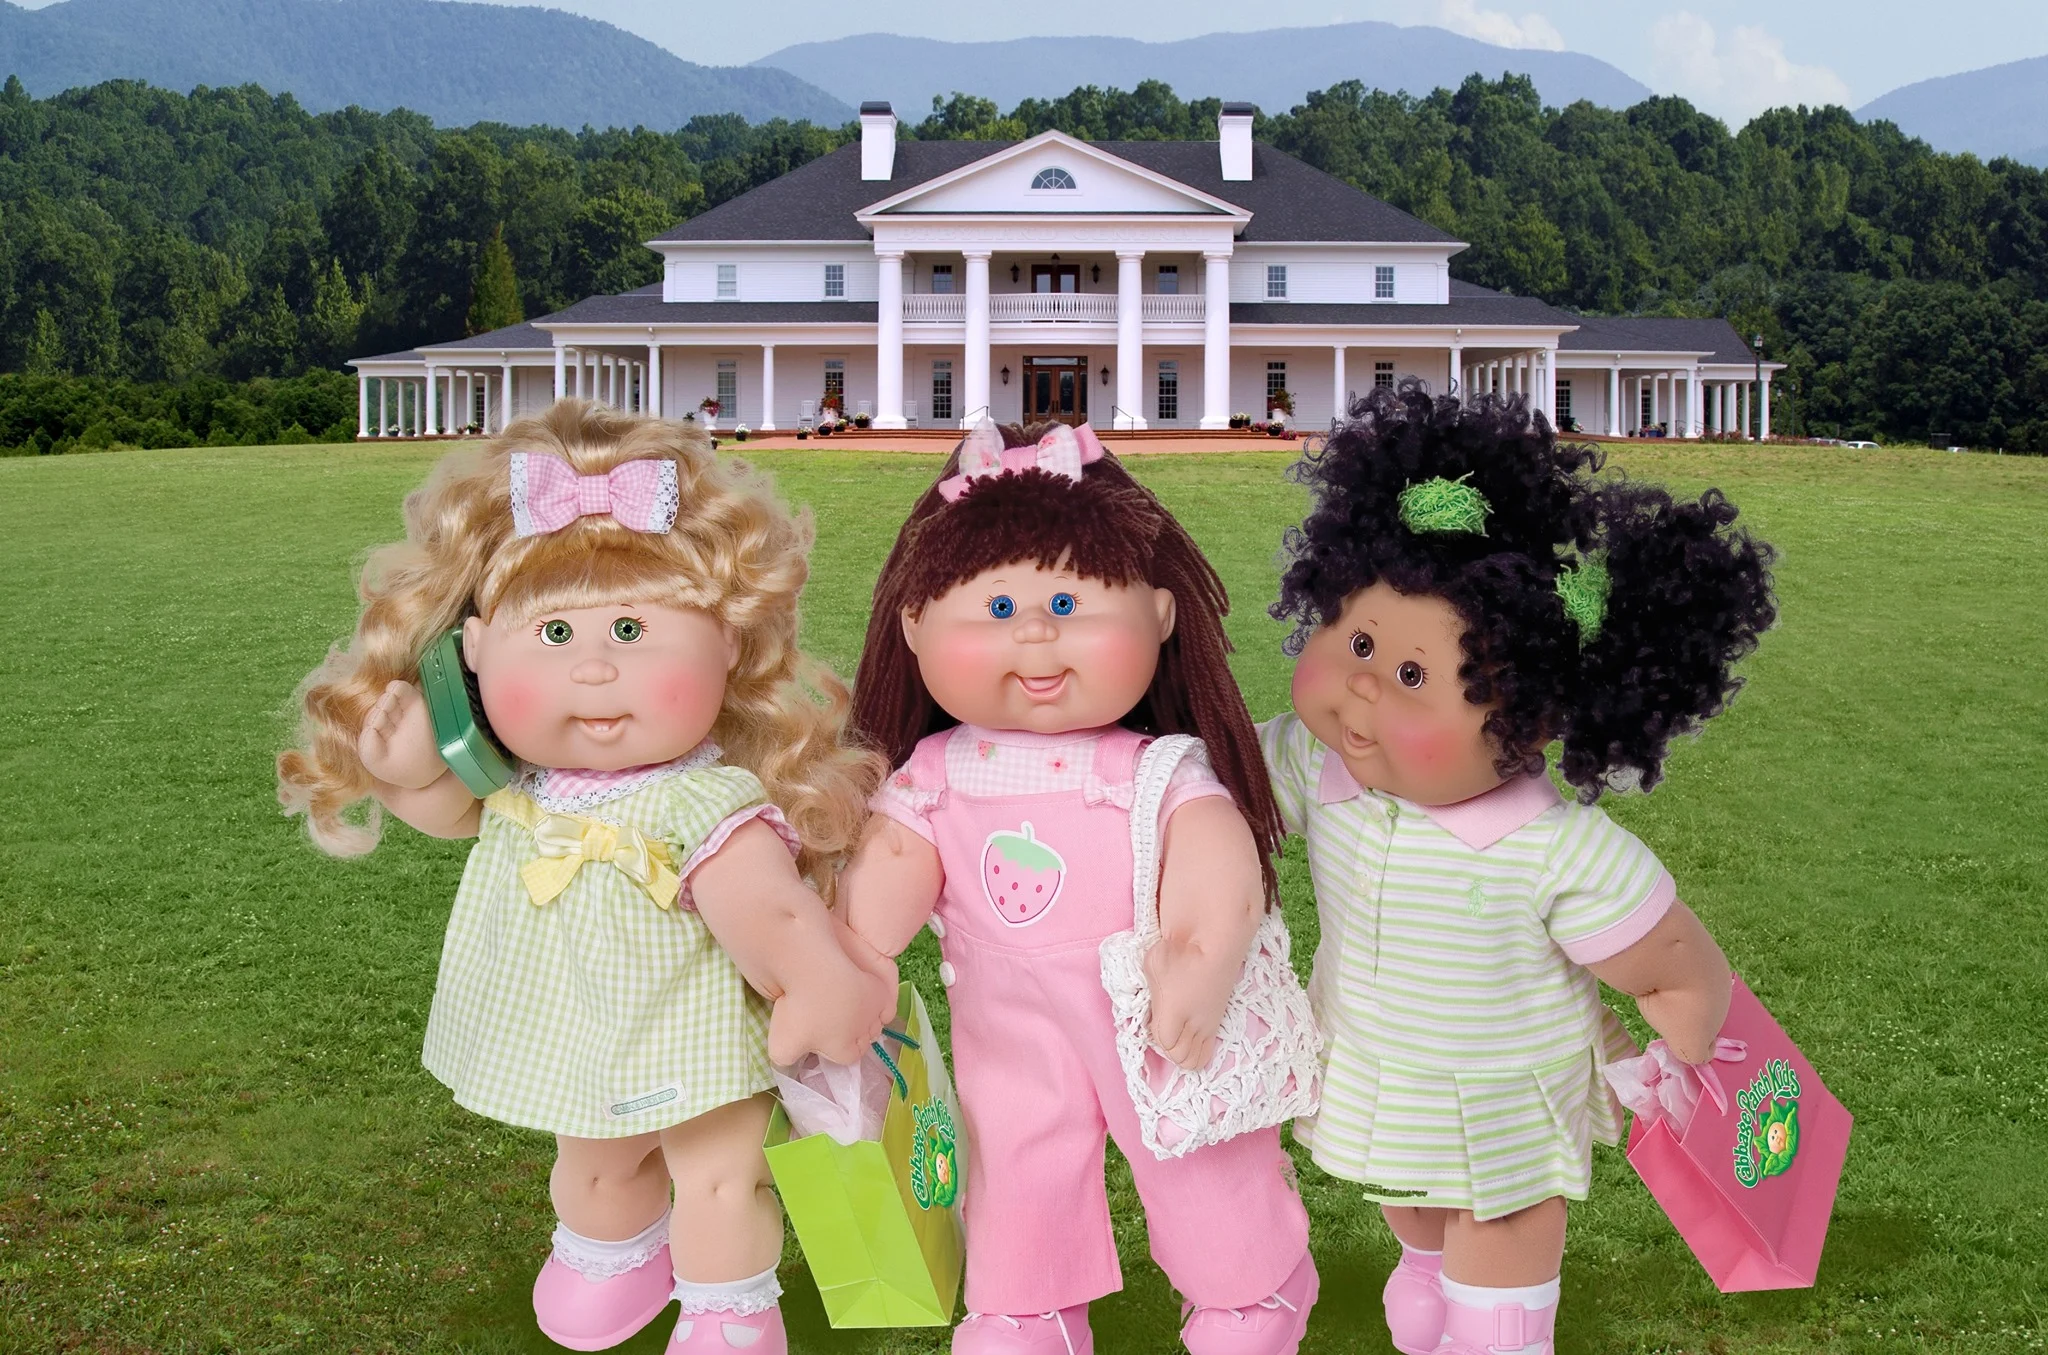 We Love Toys - Cabbage Patch Kids